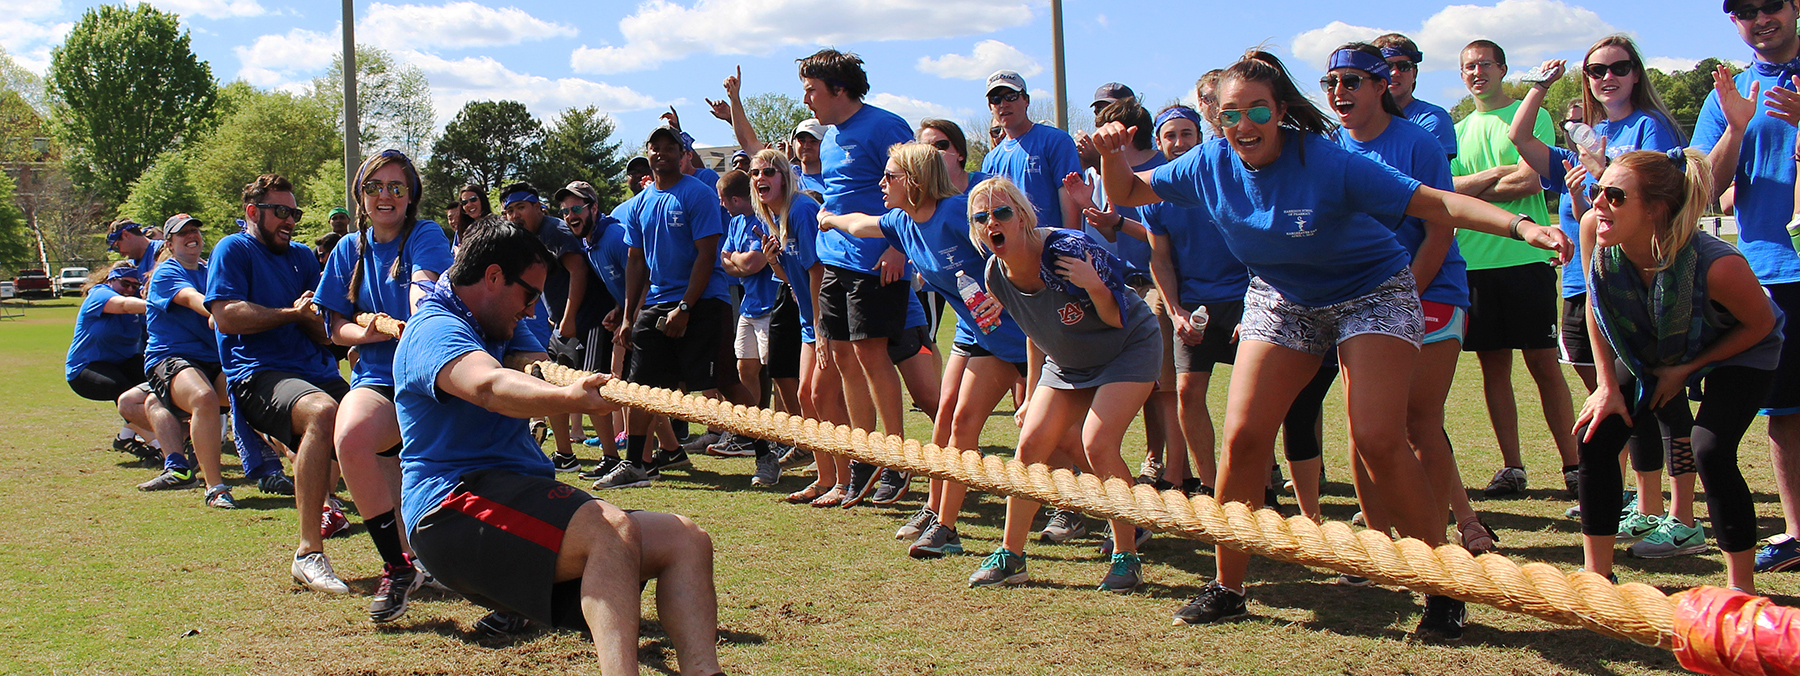 Students competing in Tug of War at Hargreaves Day